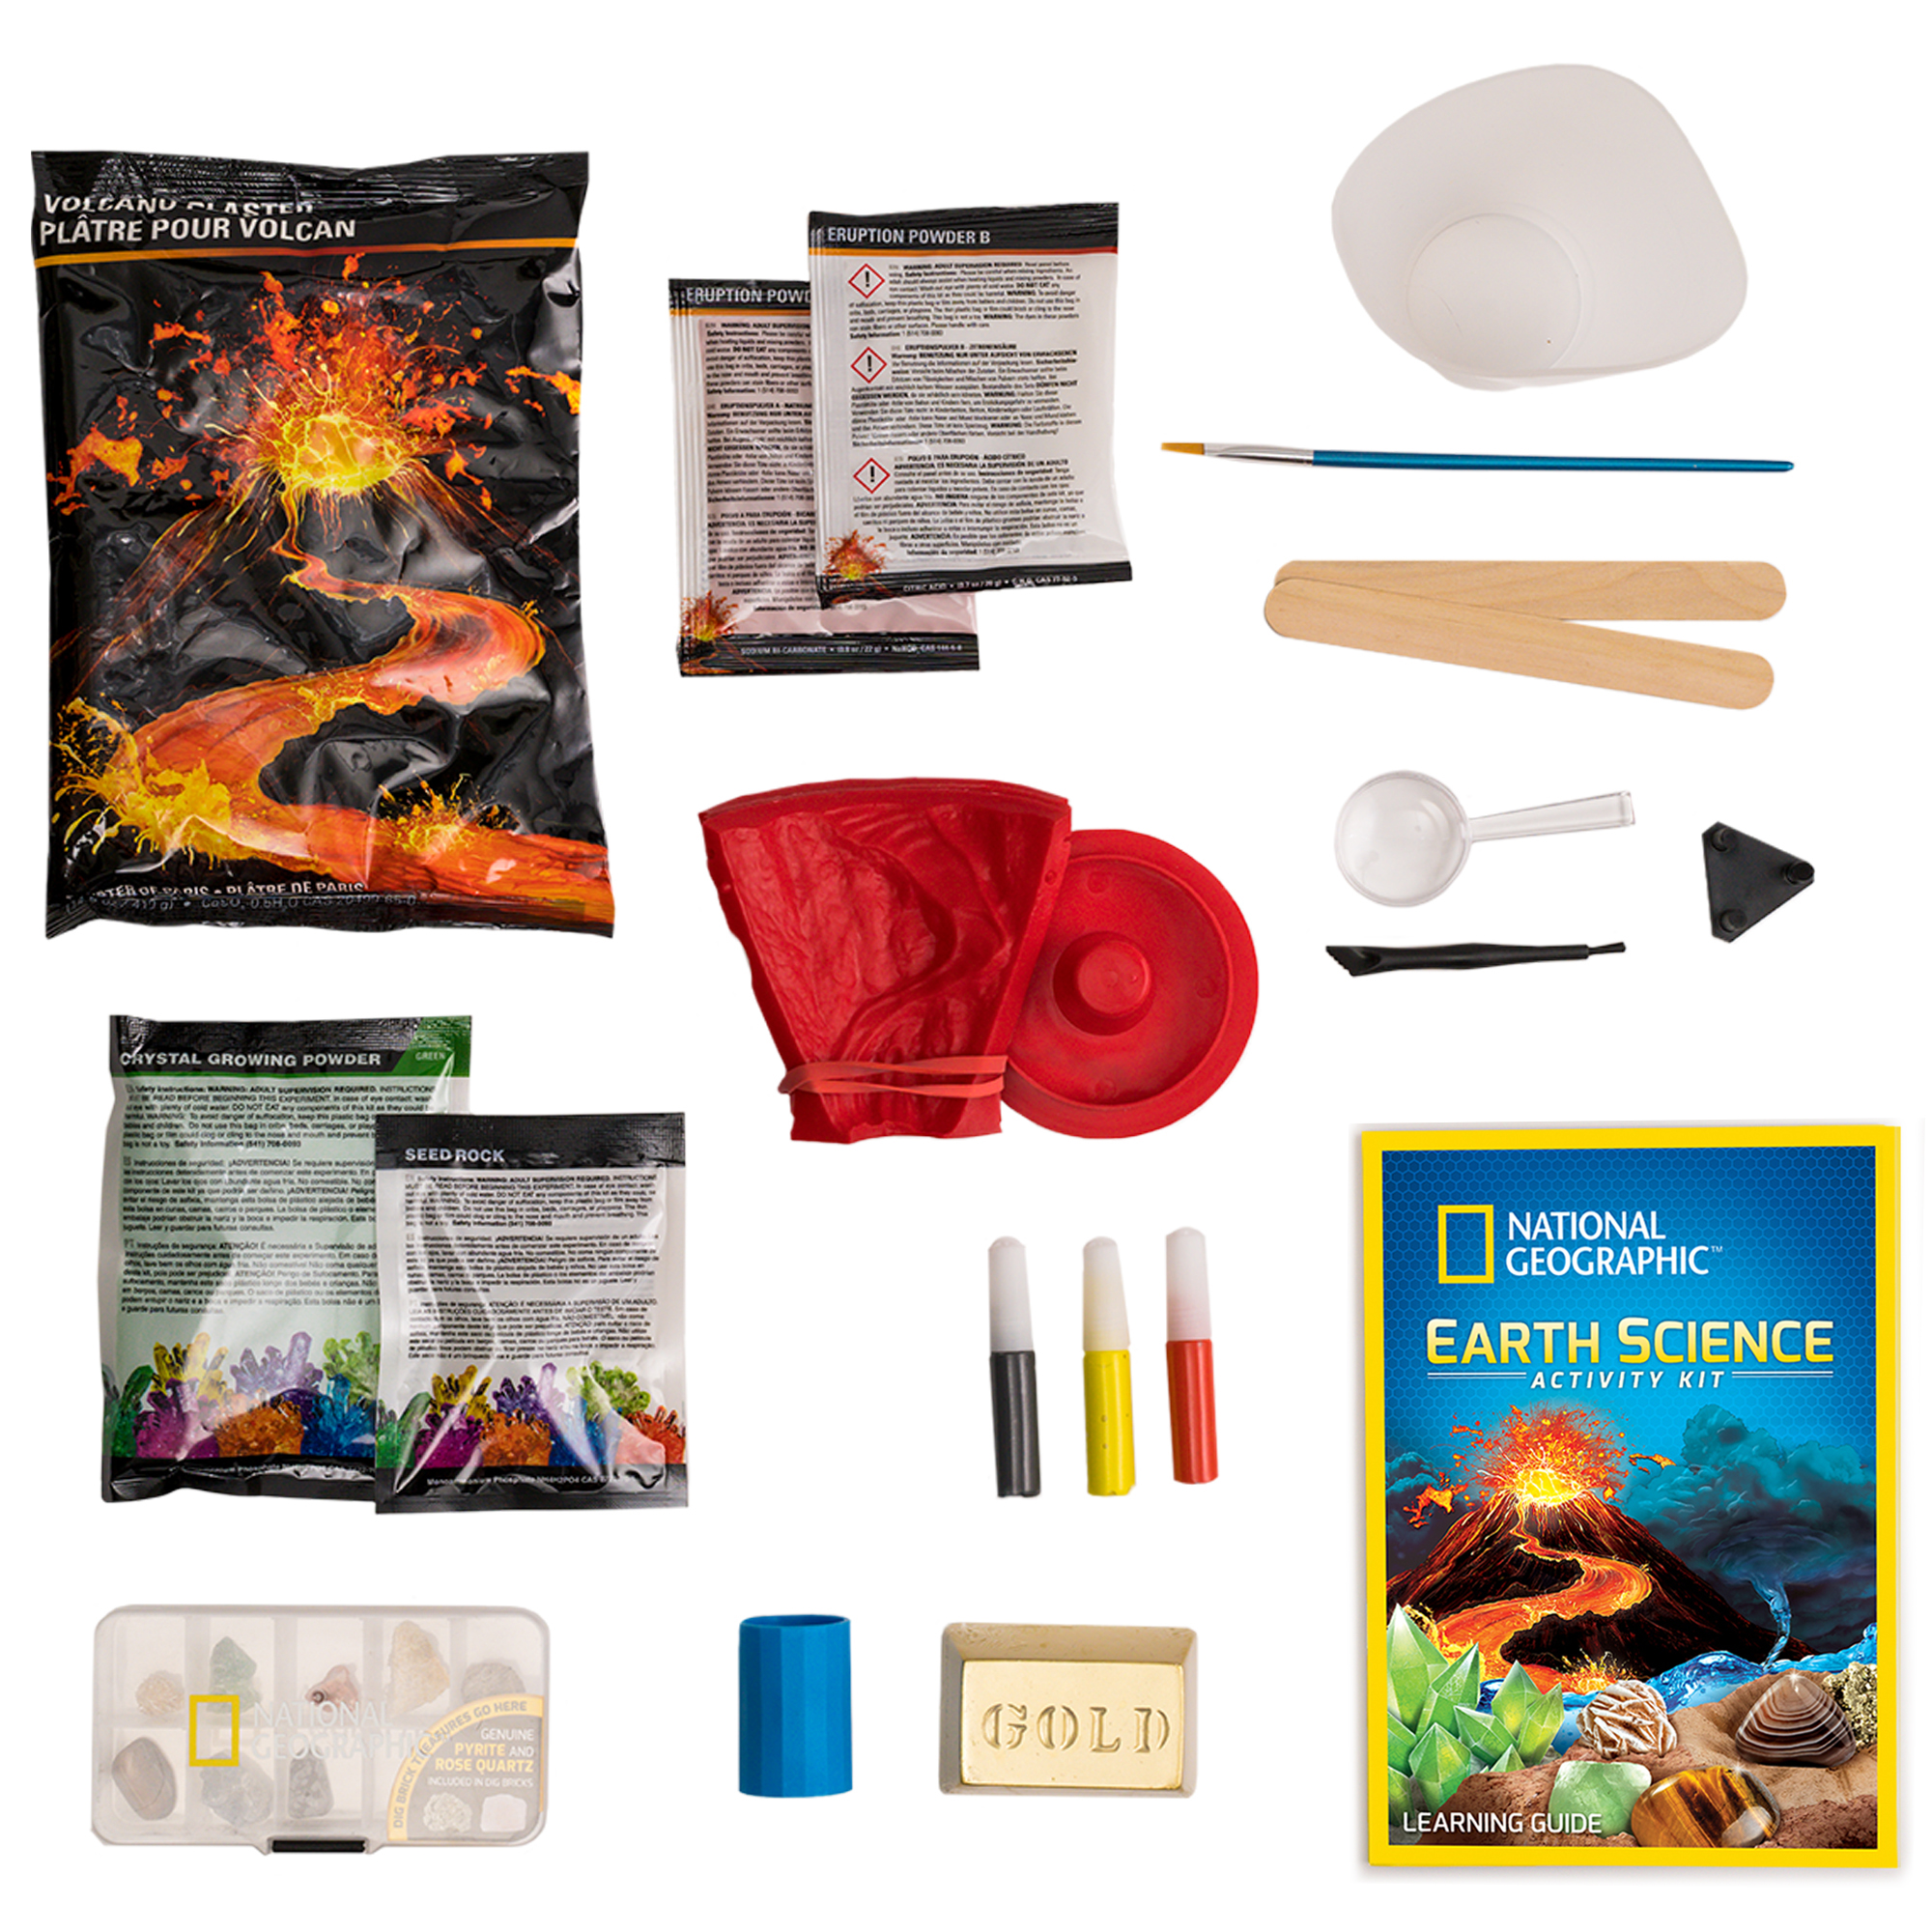 National Geographic Earth Science Activity Kit with STEM Experiments for Children 8 Years and up - image 5 of 6